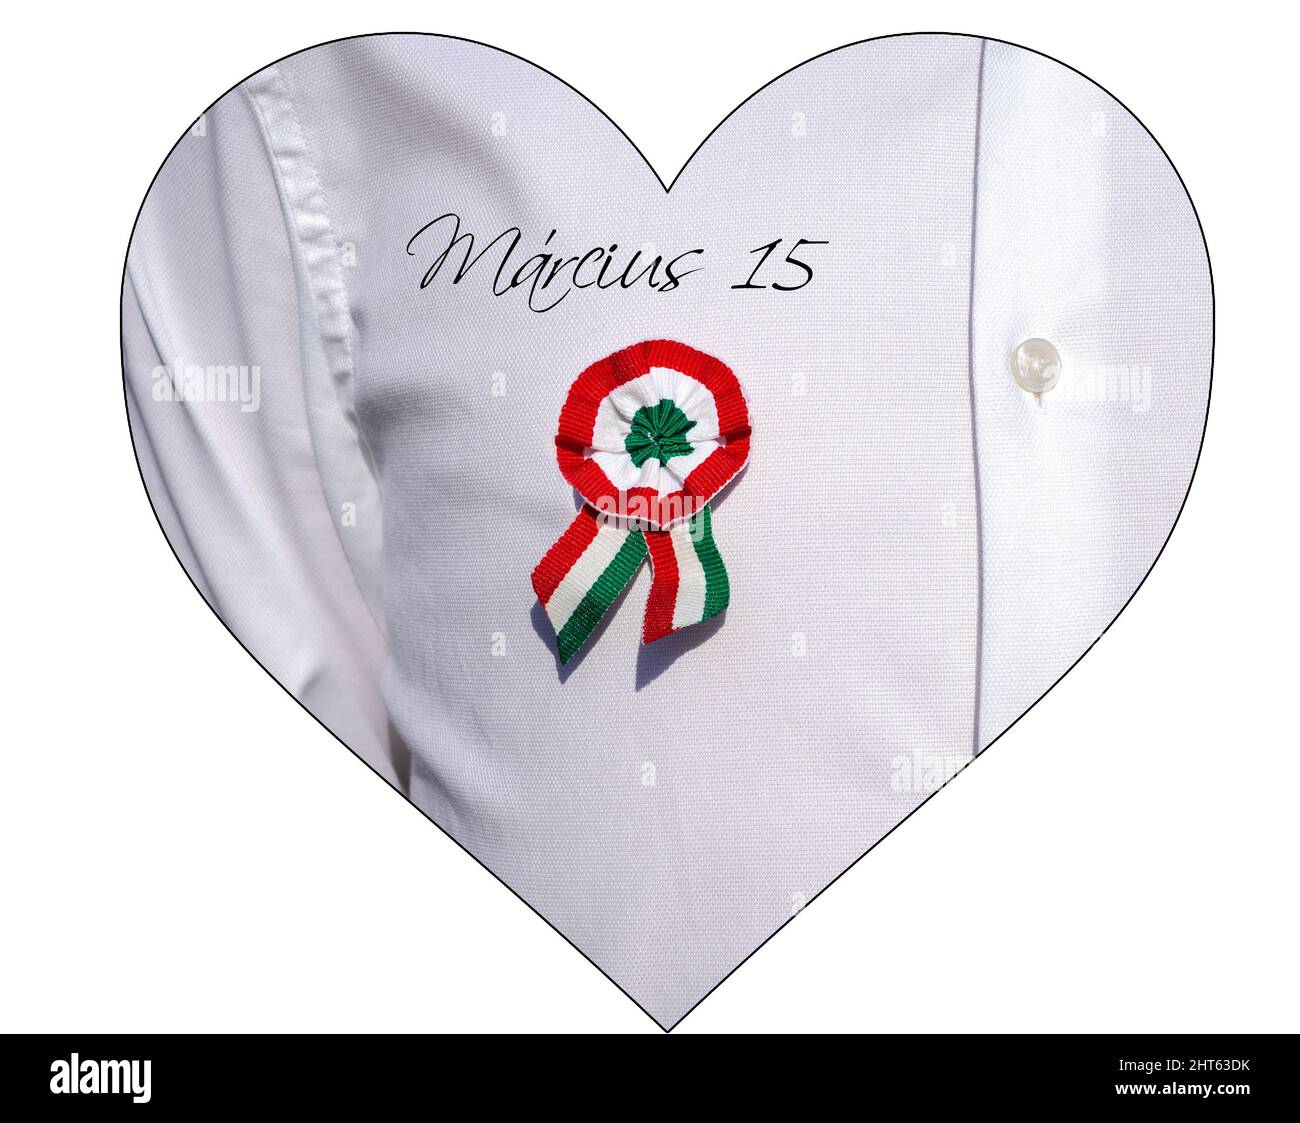 wearing a white shirt with tricolor rosette symbol of the hungarian national day 15th of march heart shaped isolated on white Marcius 15 (15 march Stock Photo